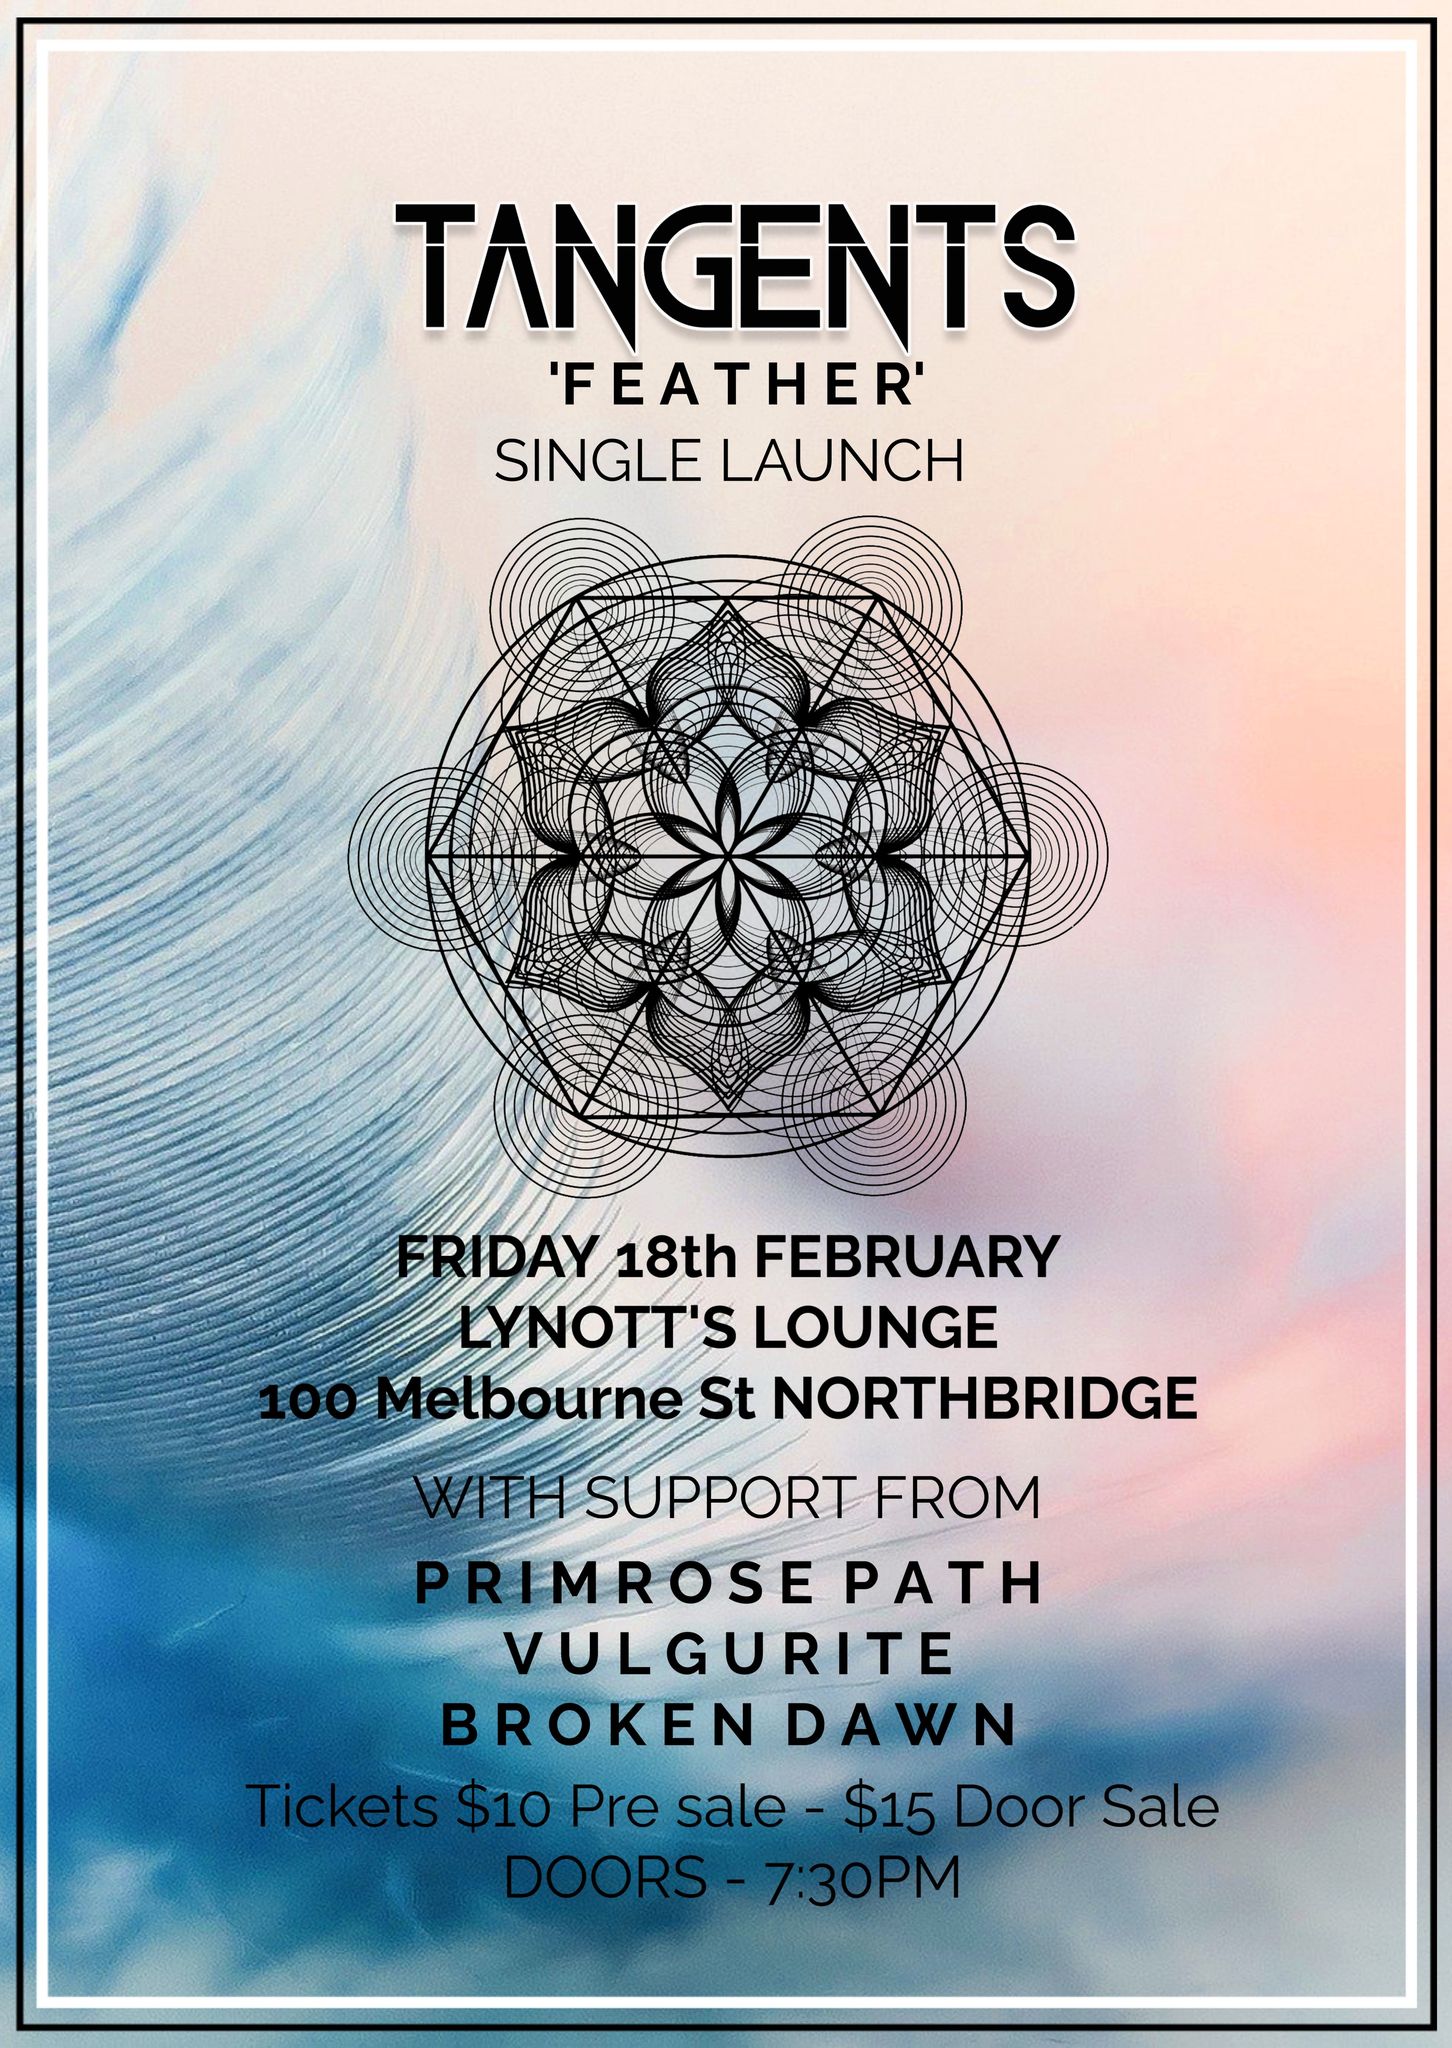 Tangents 'Feather' Single Launch